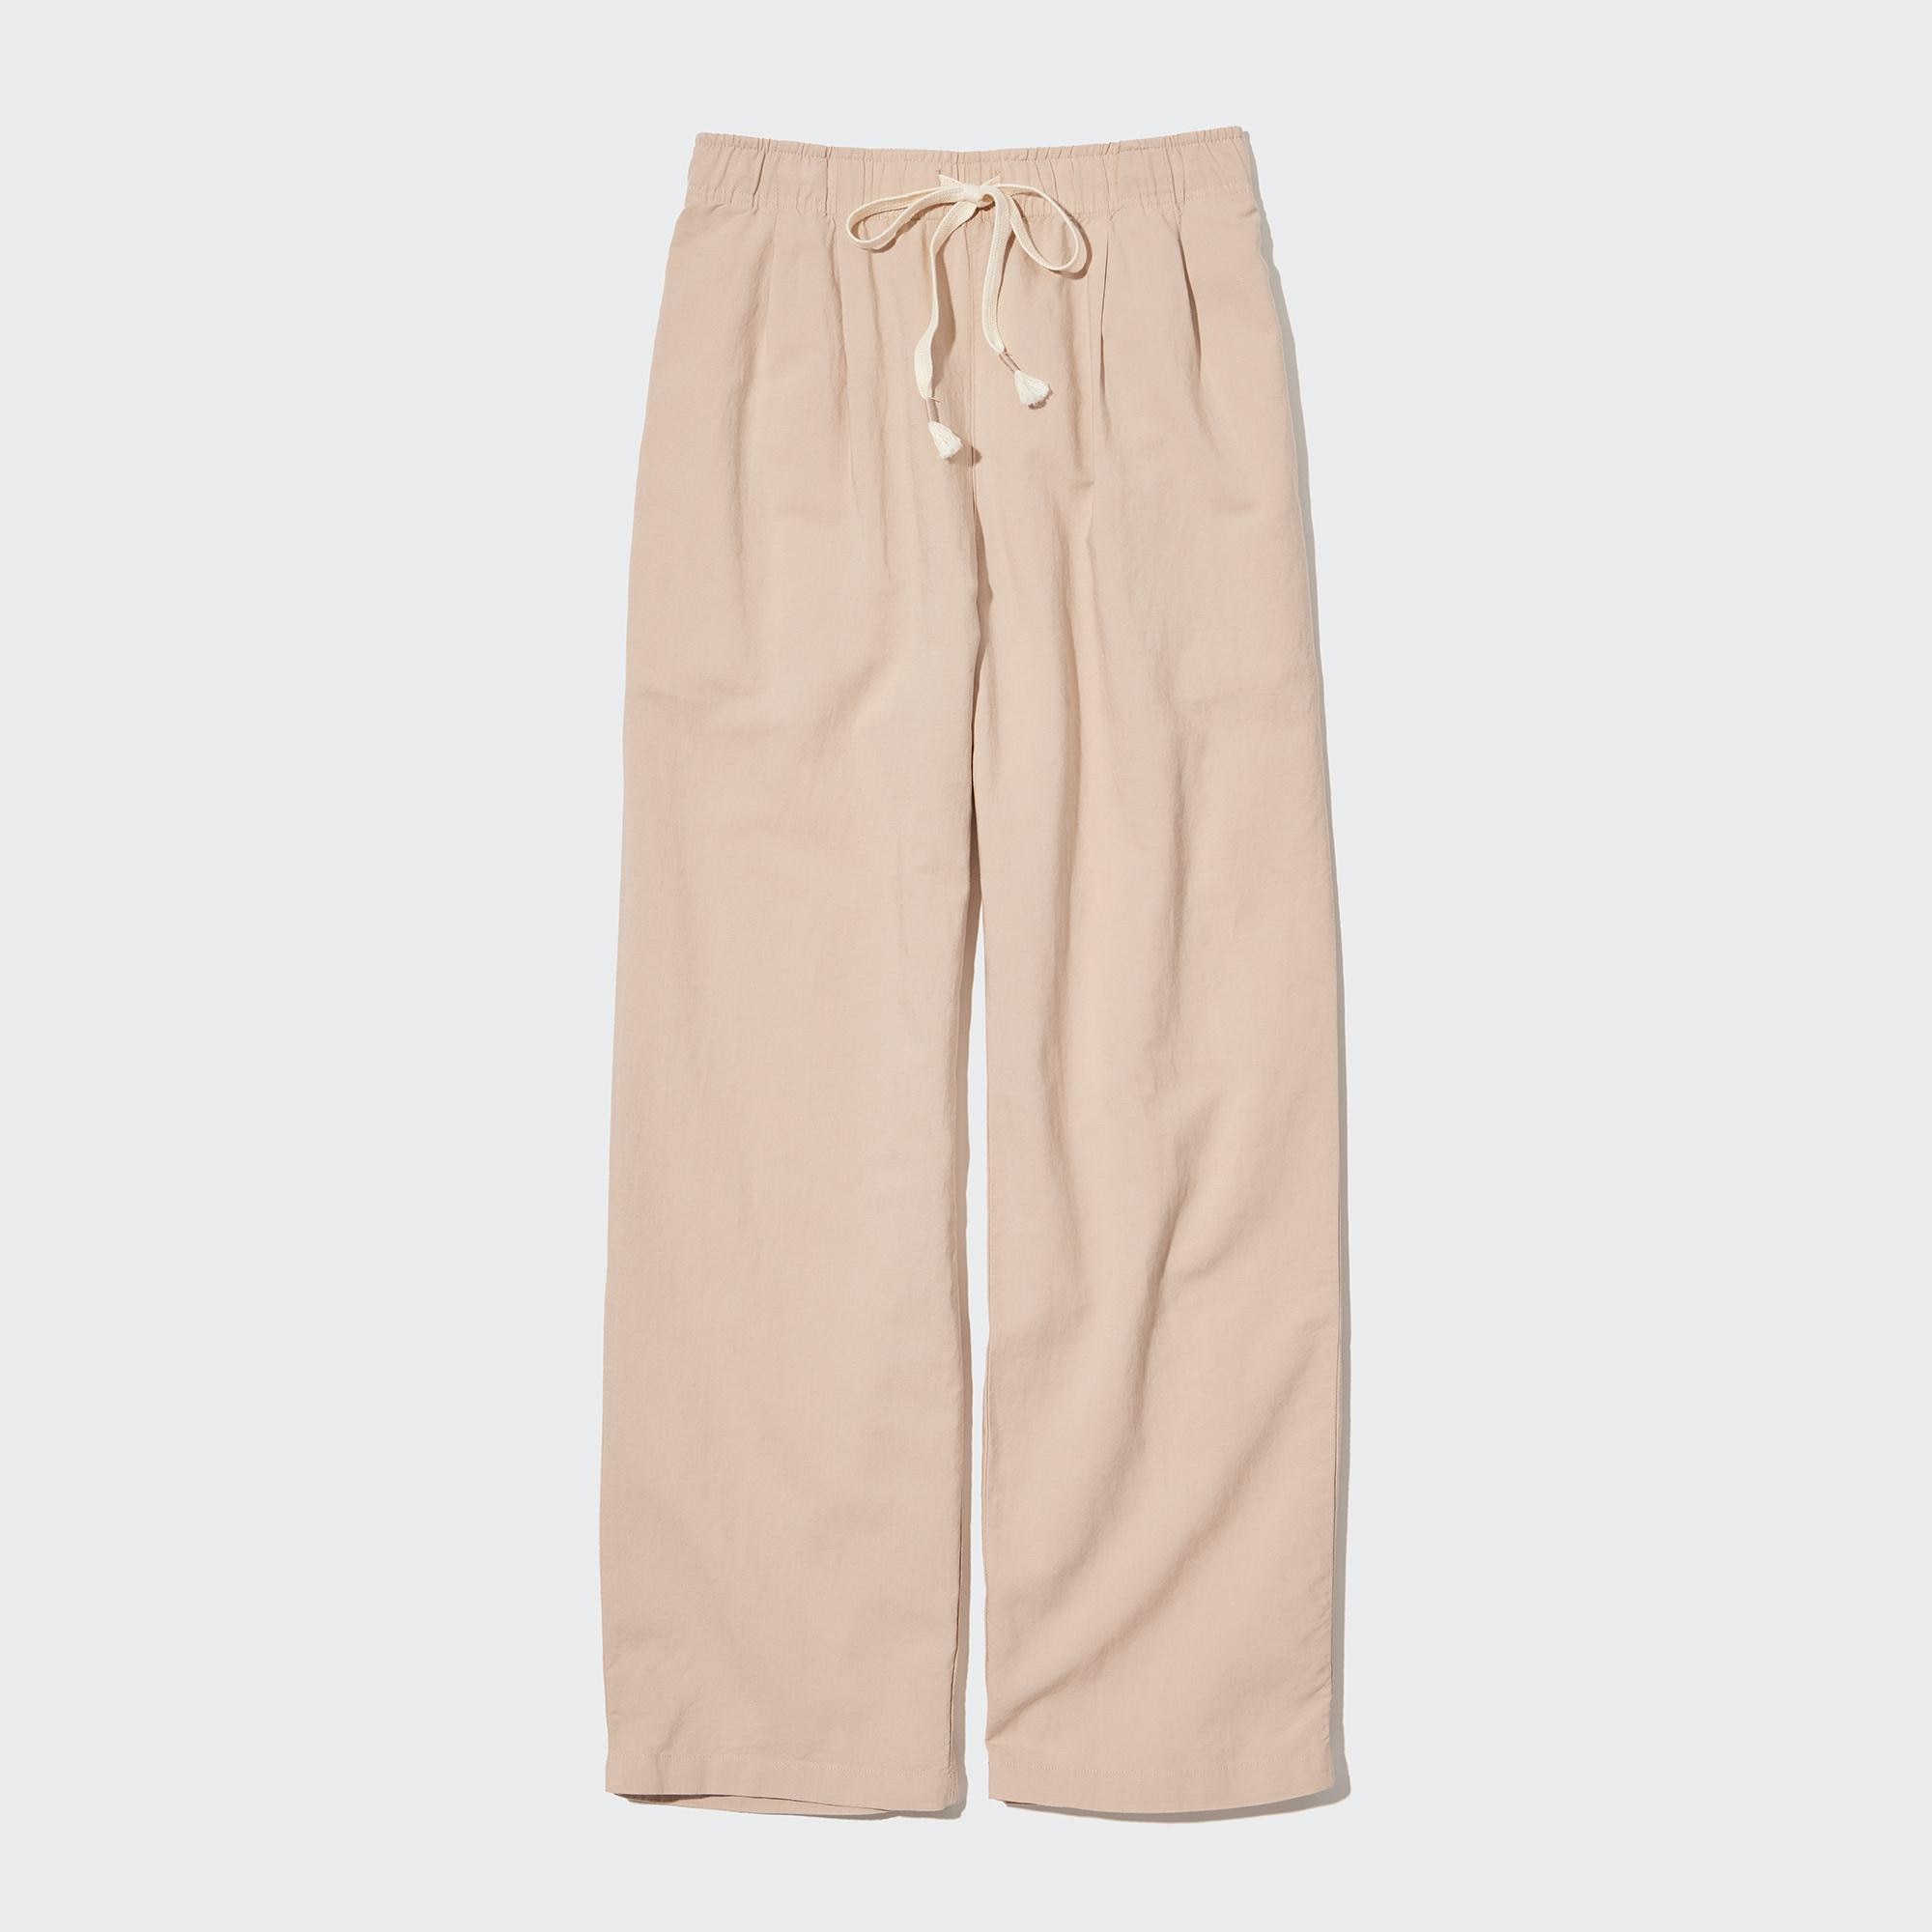 UNIQLO LINEN COTTON TAPERED PANTS | Yorkdale Mall